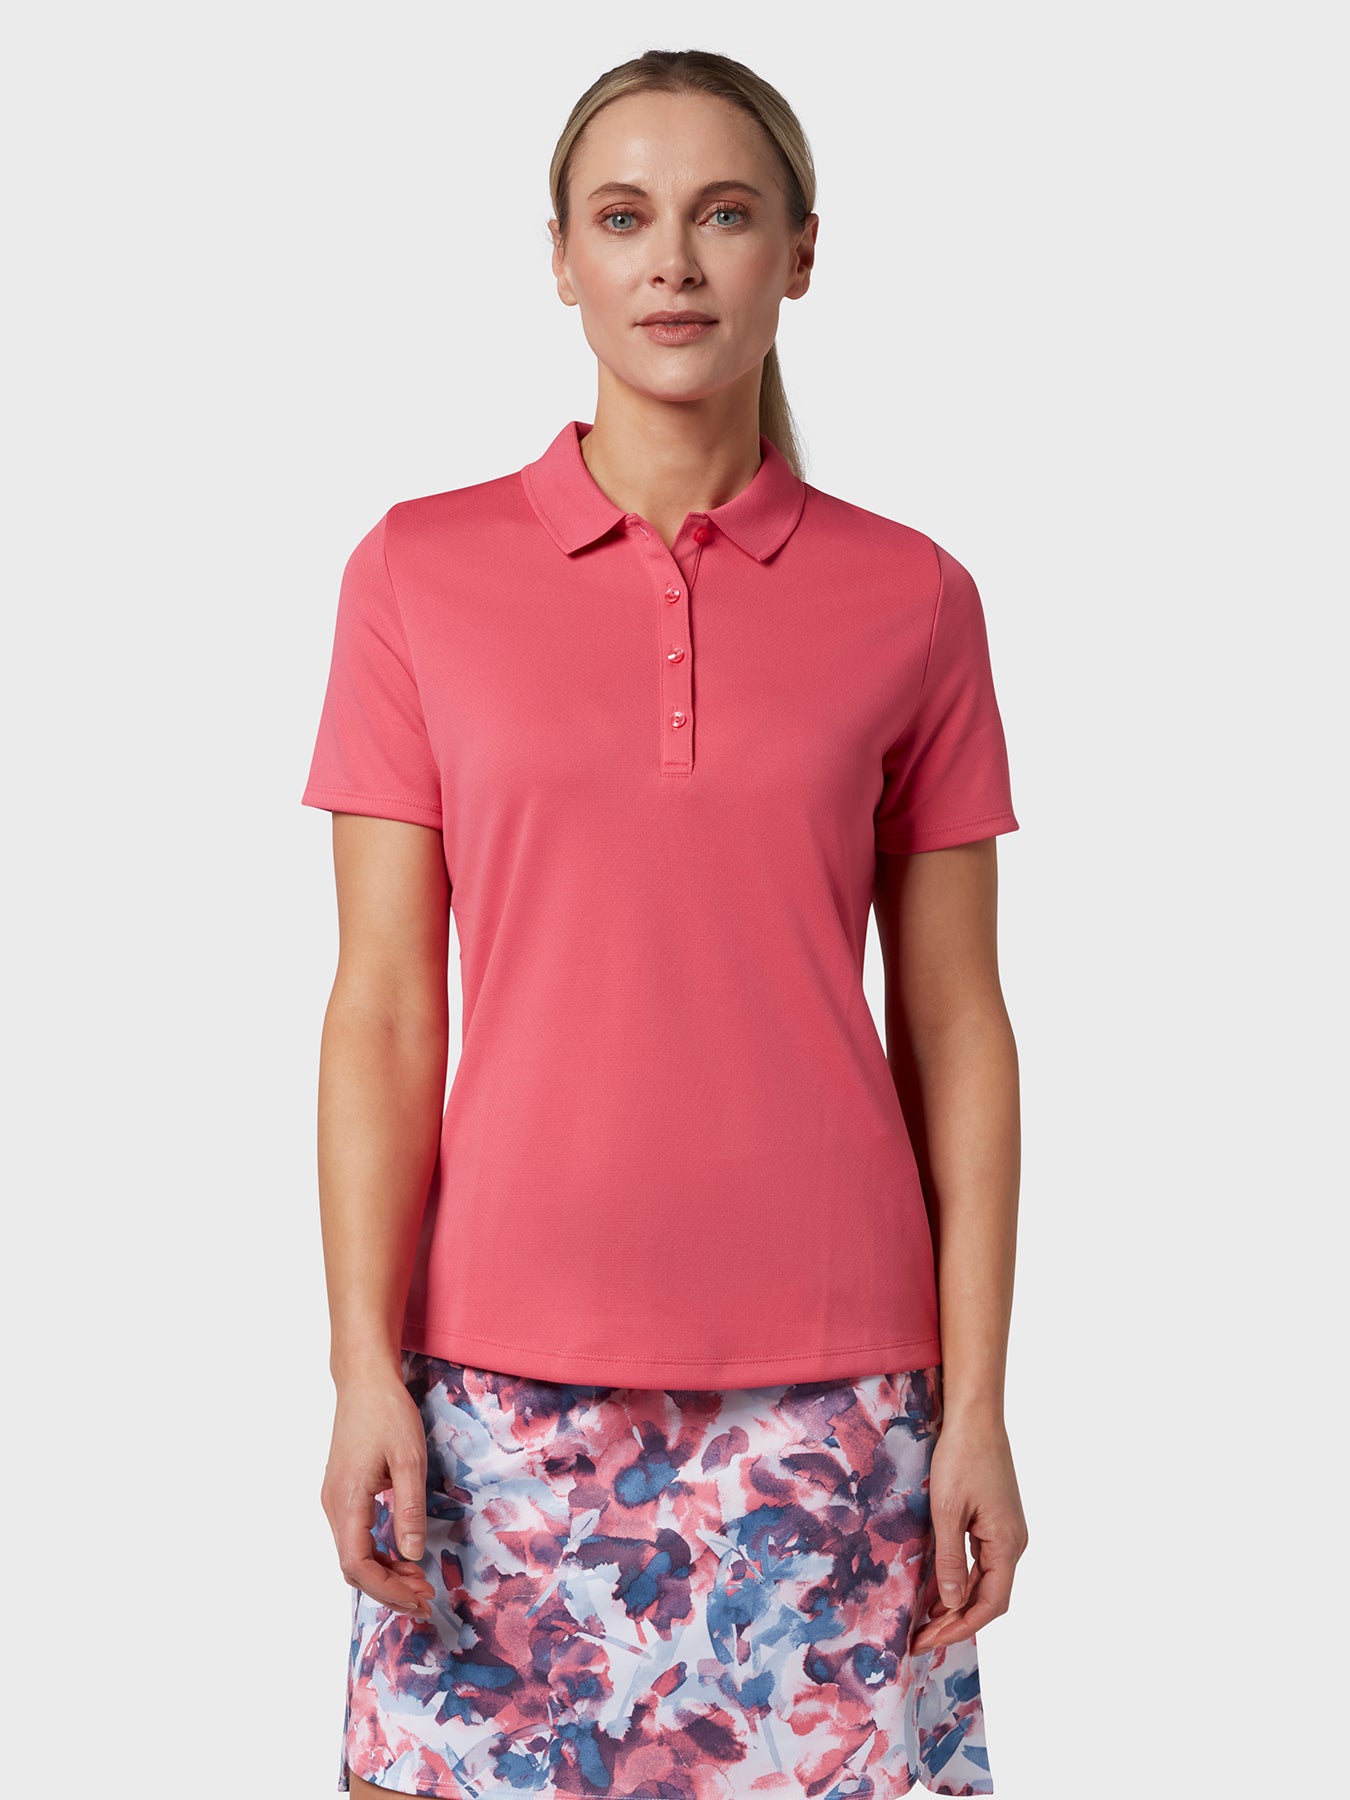 View Swing Tech Womens Polo In Fruit Dove Fruit Dove M information